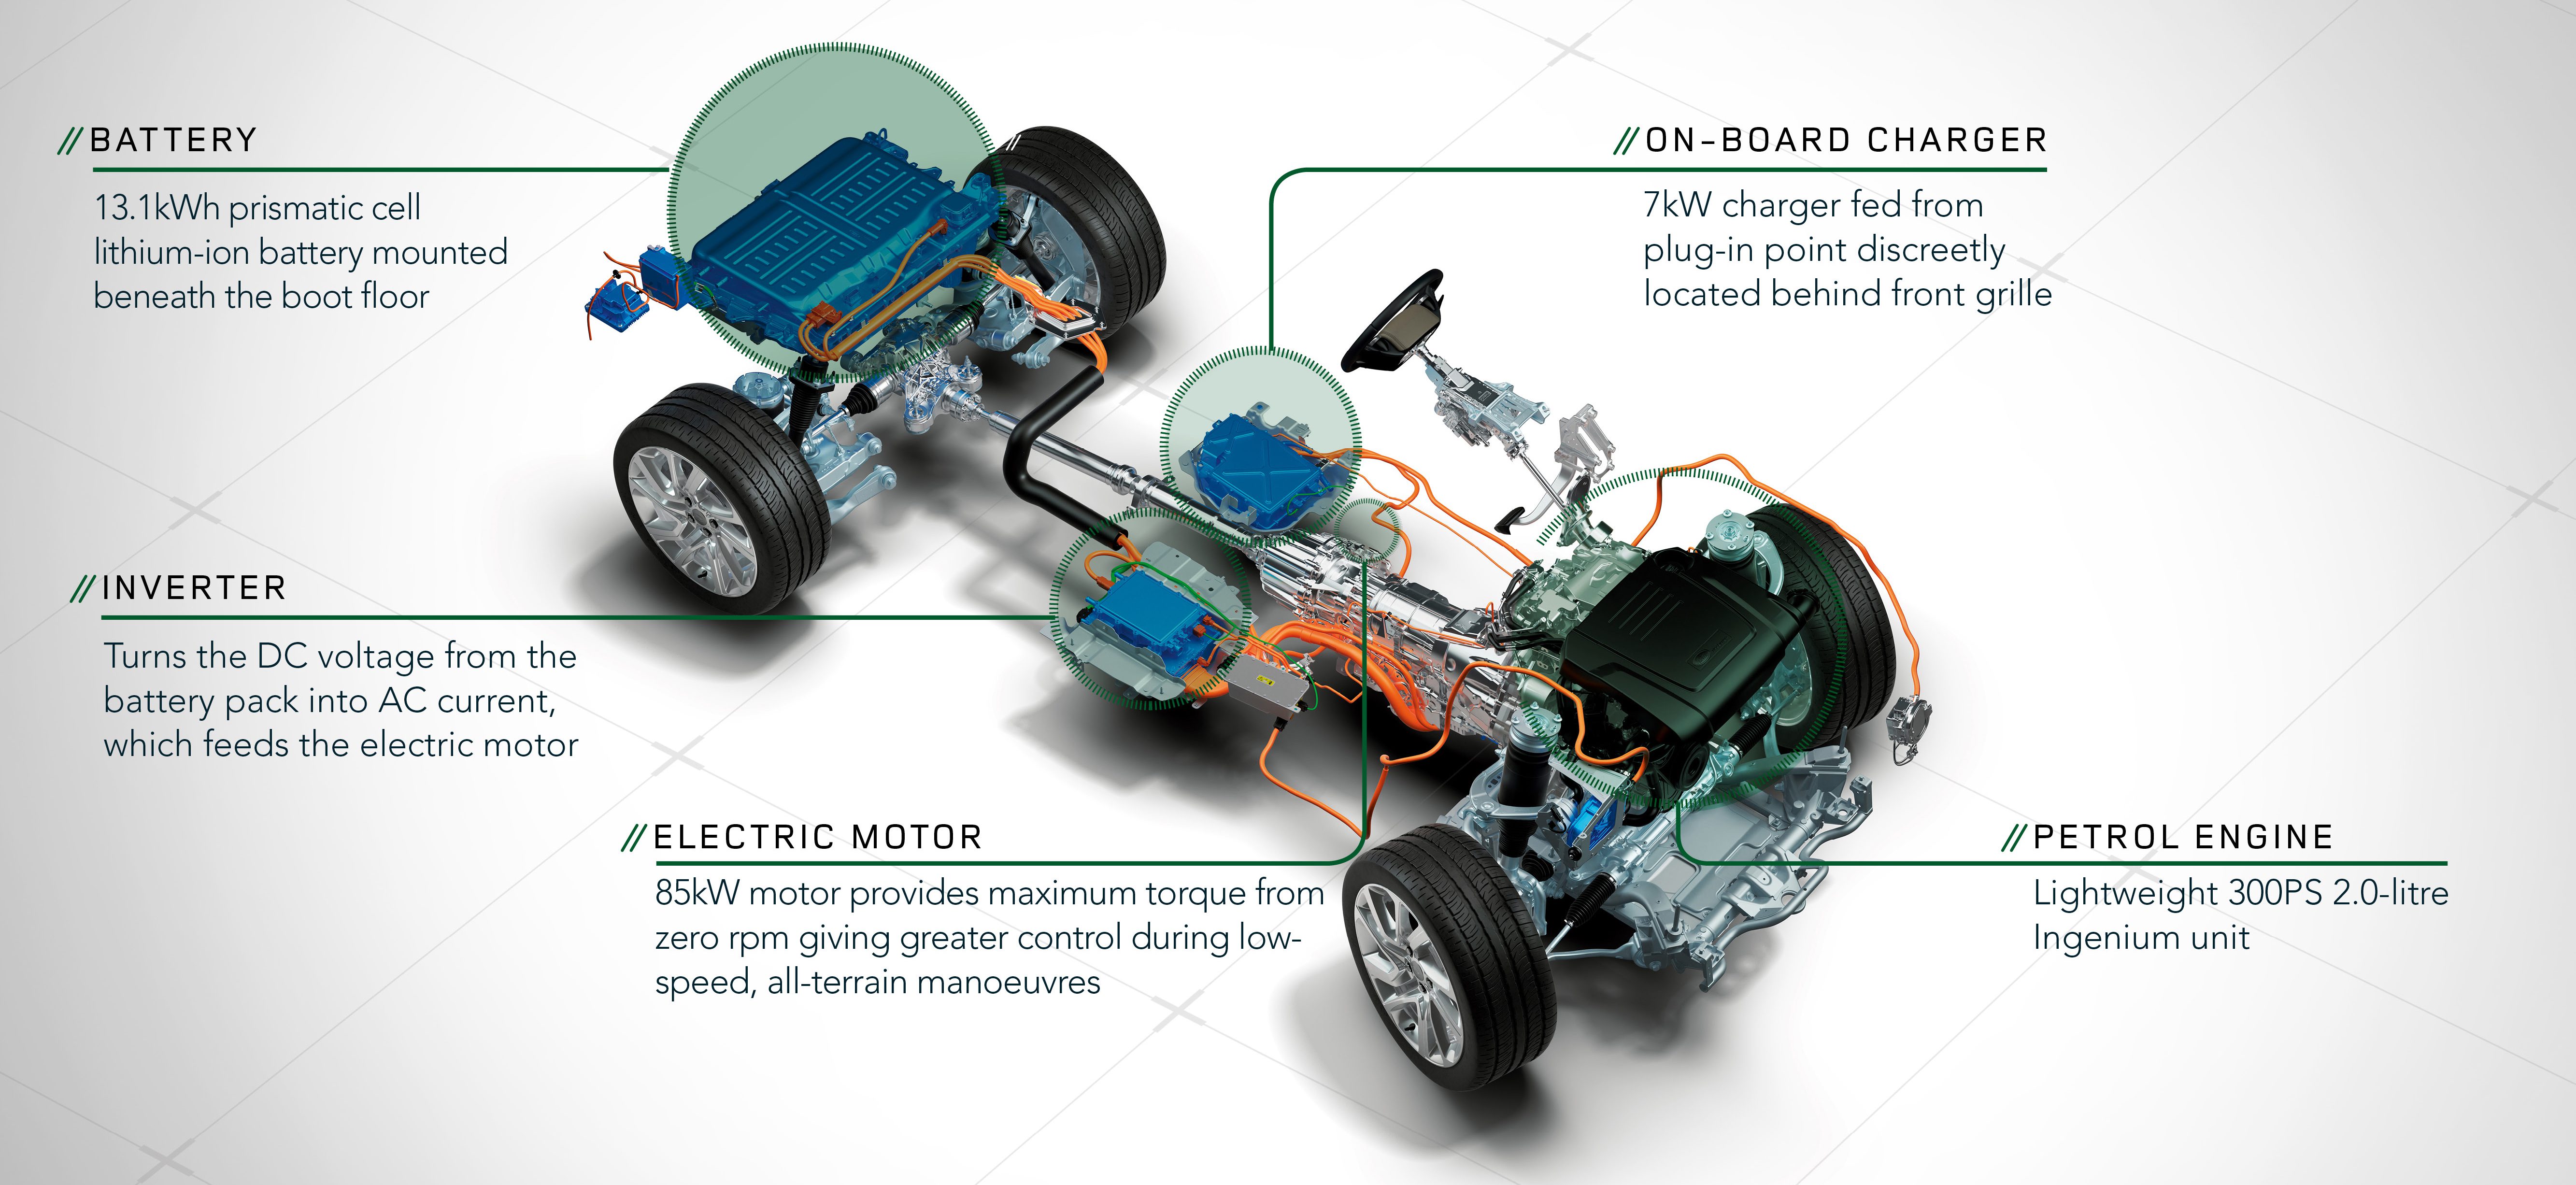 Land Rover launches first plug-in hybrid Range Rover - Electrek